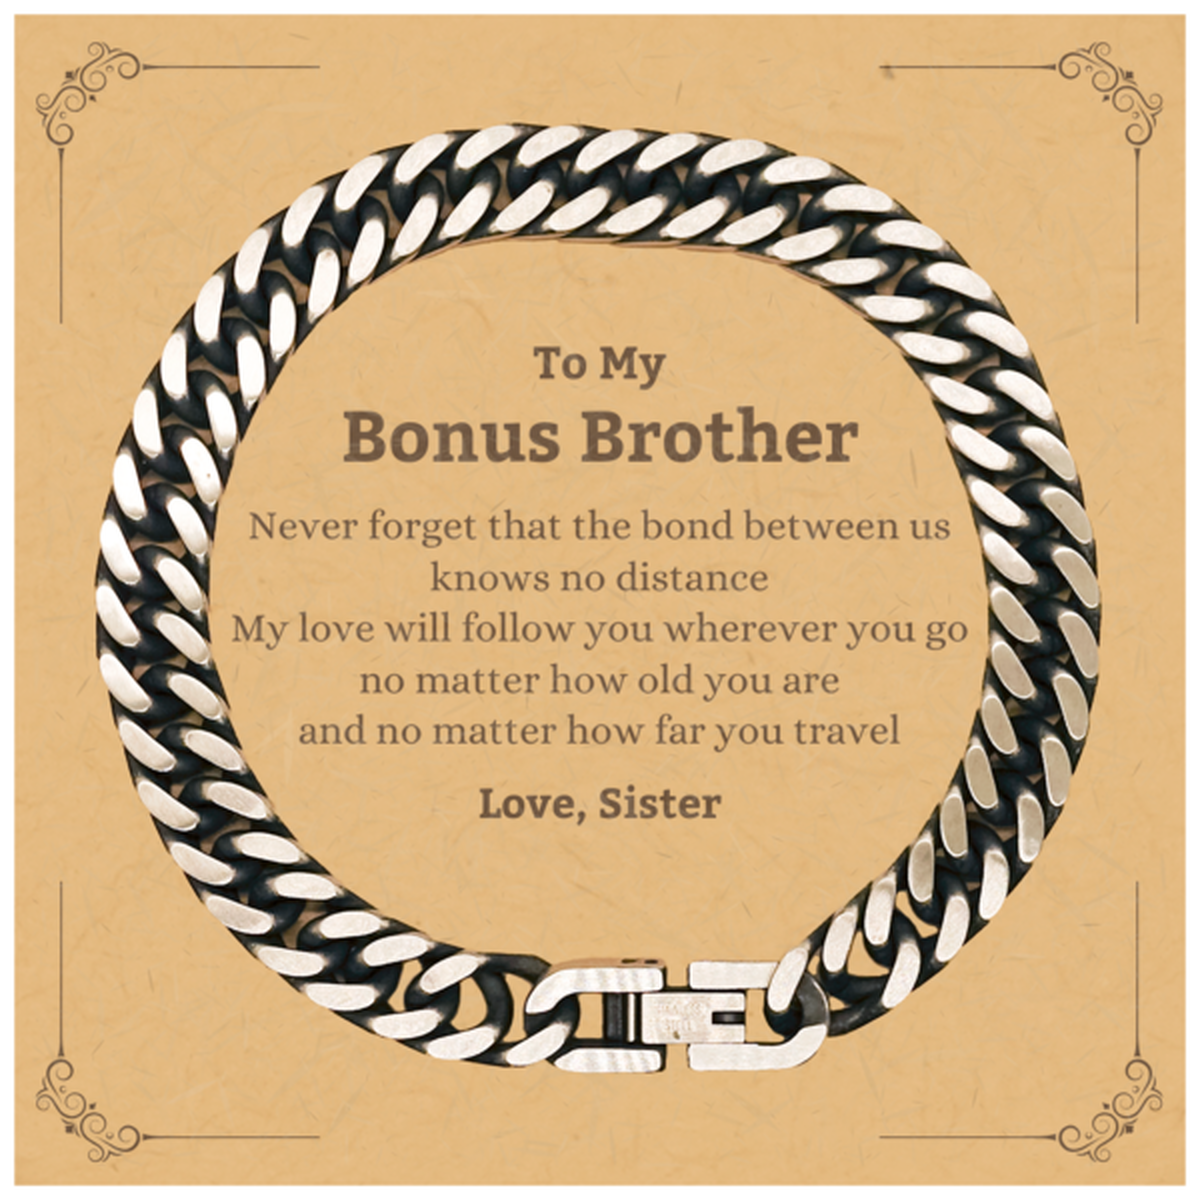 Bonus Brother Birthday Gifts from Sister, Adjustable Cuban Link Chain Bracelet for Bonus Brother Christmas Graduation Unique Gifts Bonus Brother Never forget that the bond between us knows no distance. Love, Sister